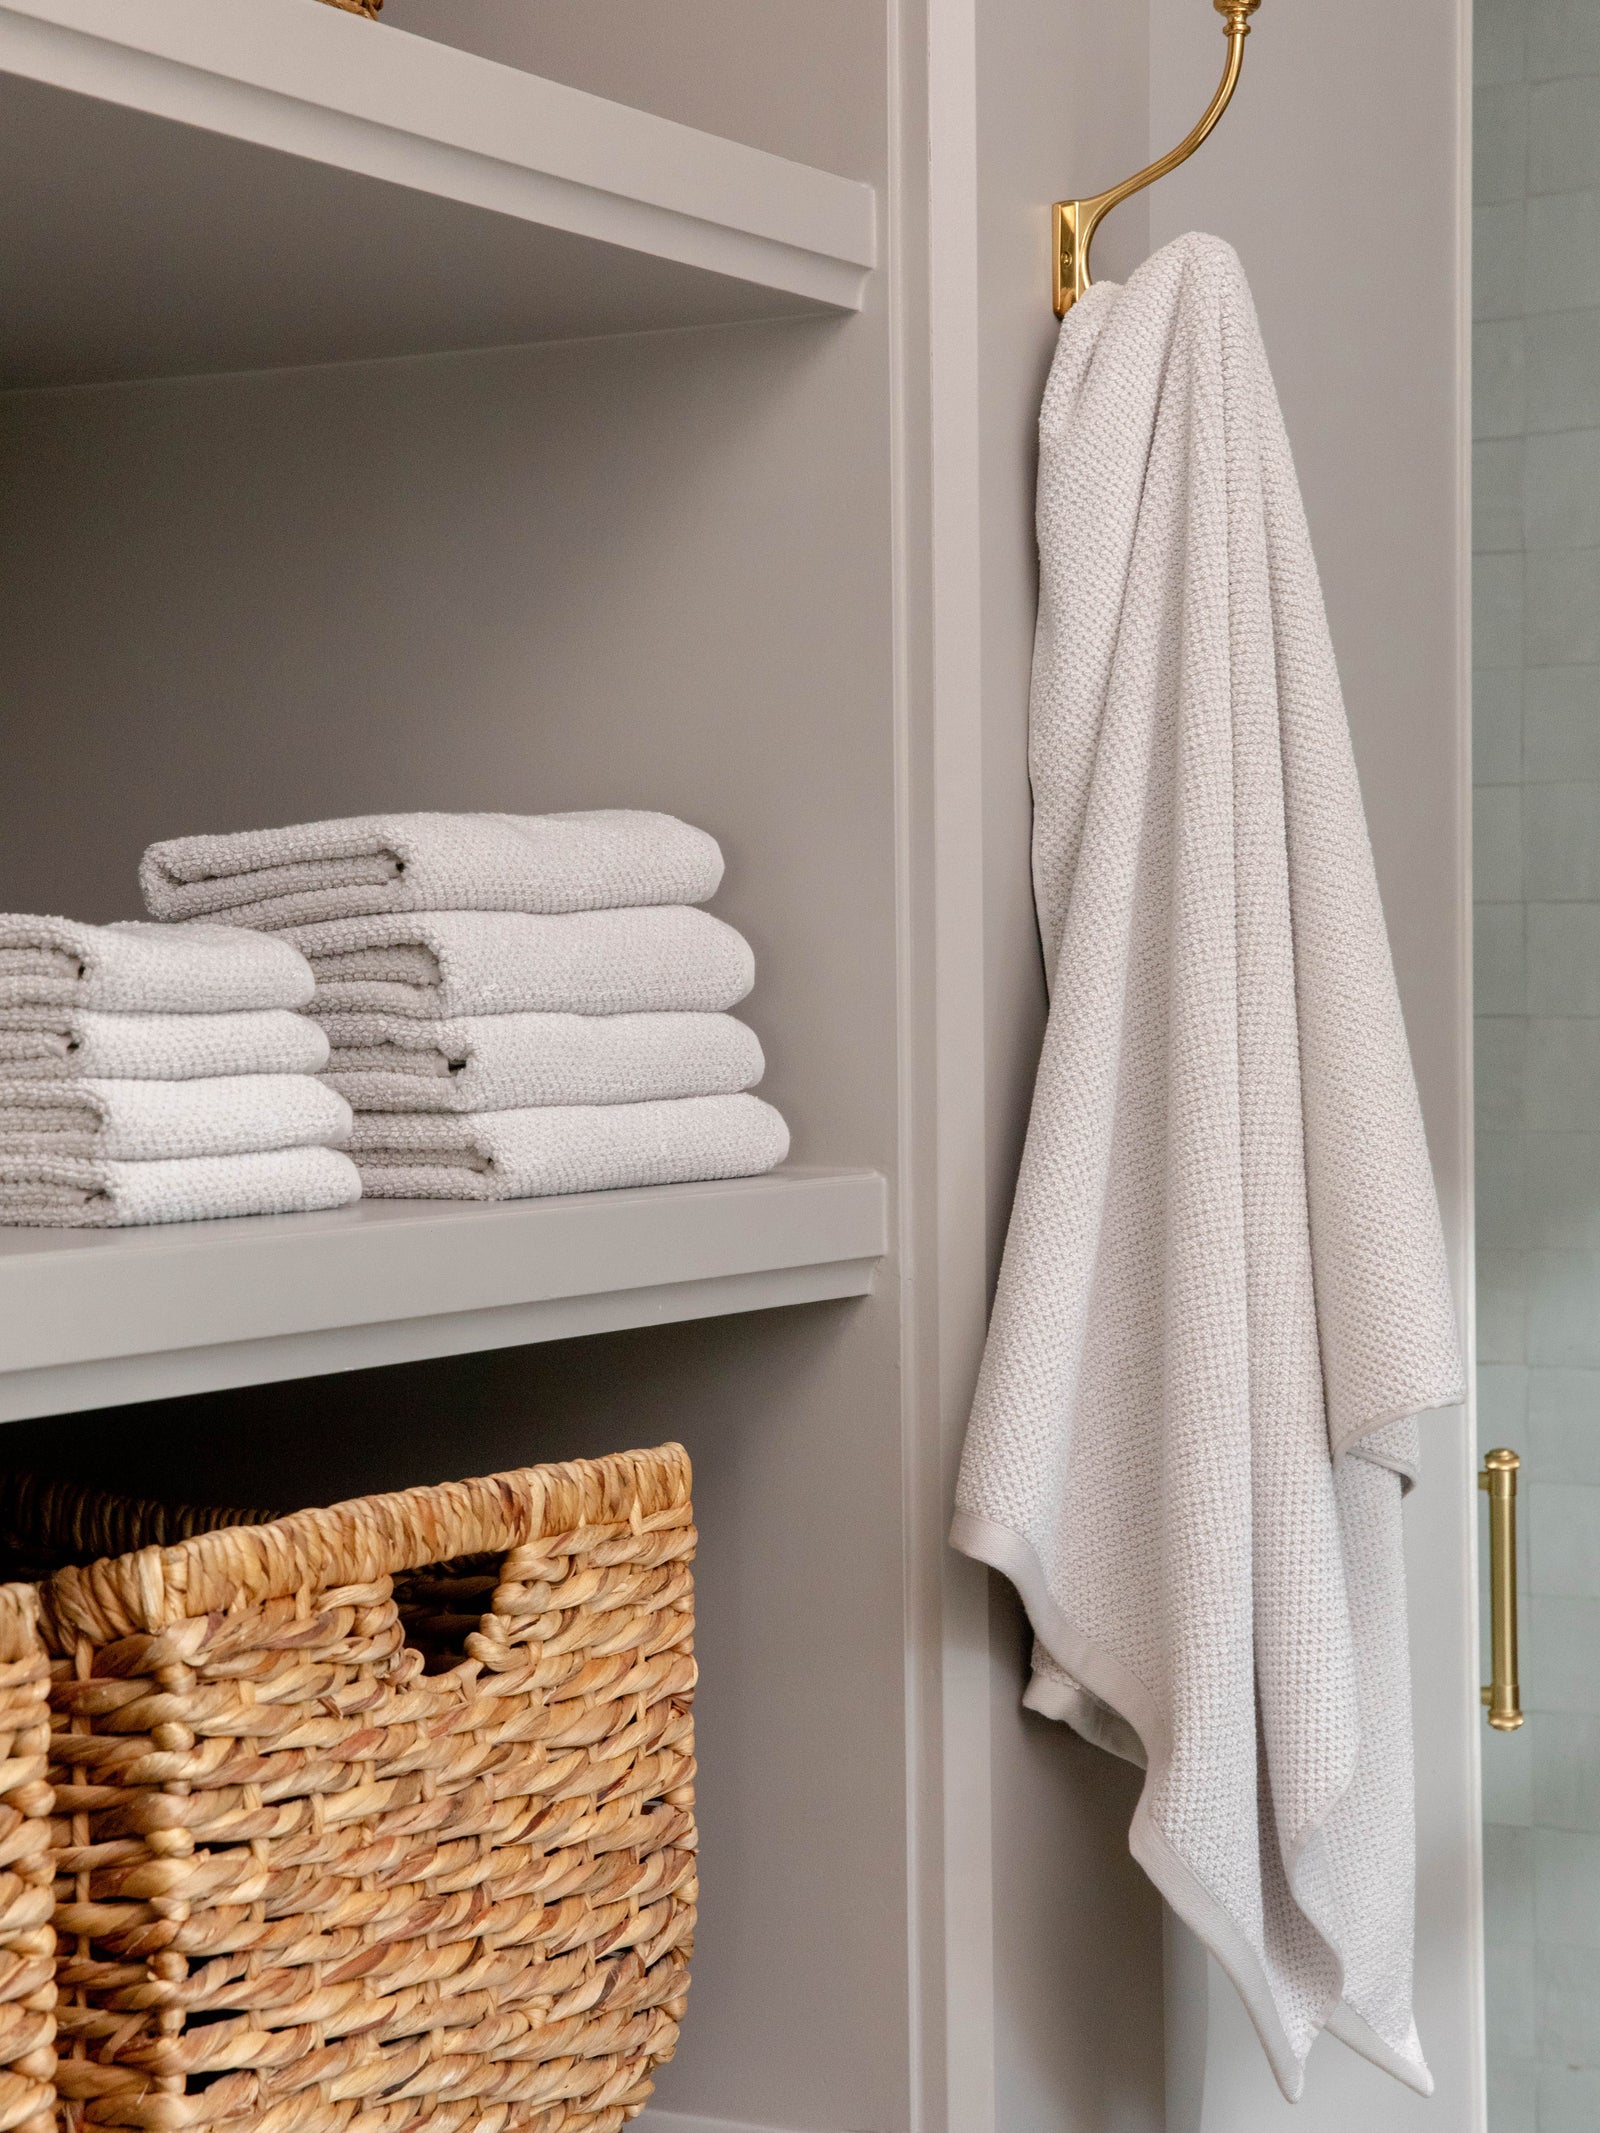 Nantucket Bath Sheets in the color Heathered Light Grey. Photo of Nantucket Bath Sheets taken as Nantucket hand towels, wash clothes, and bath towels are neatly placed on shelves in a bathroom. 